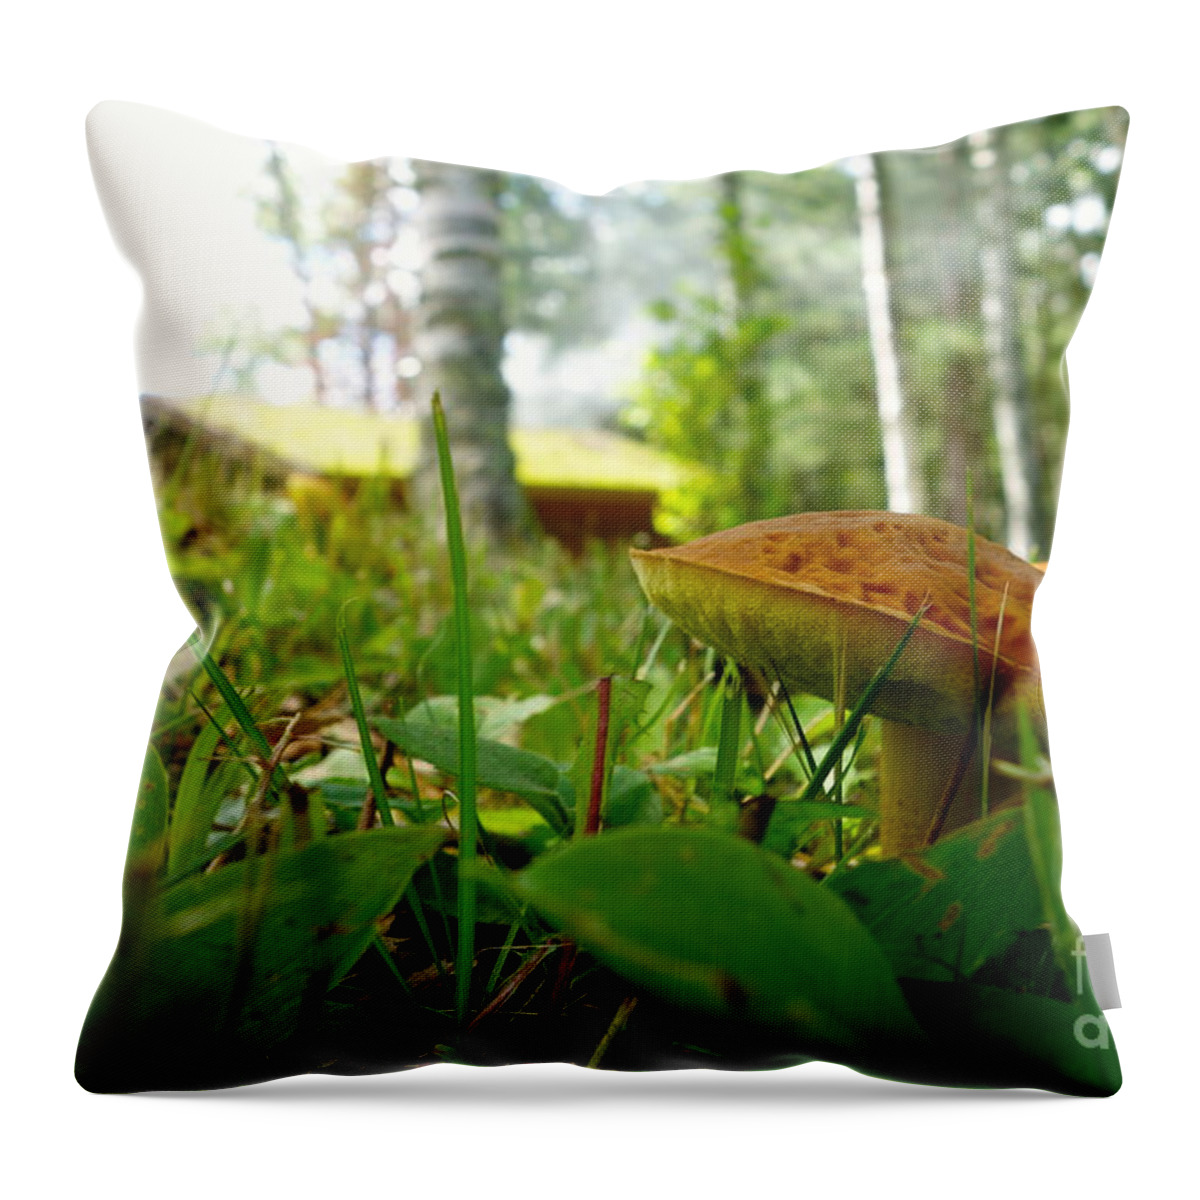 Fungi Throw Pillow featuring the photograph Fairy Home by Jacqueline Athmann